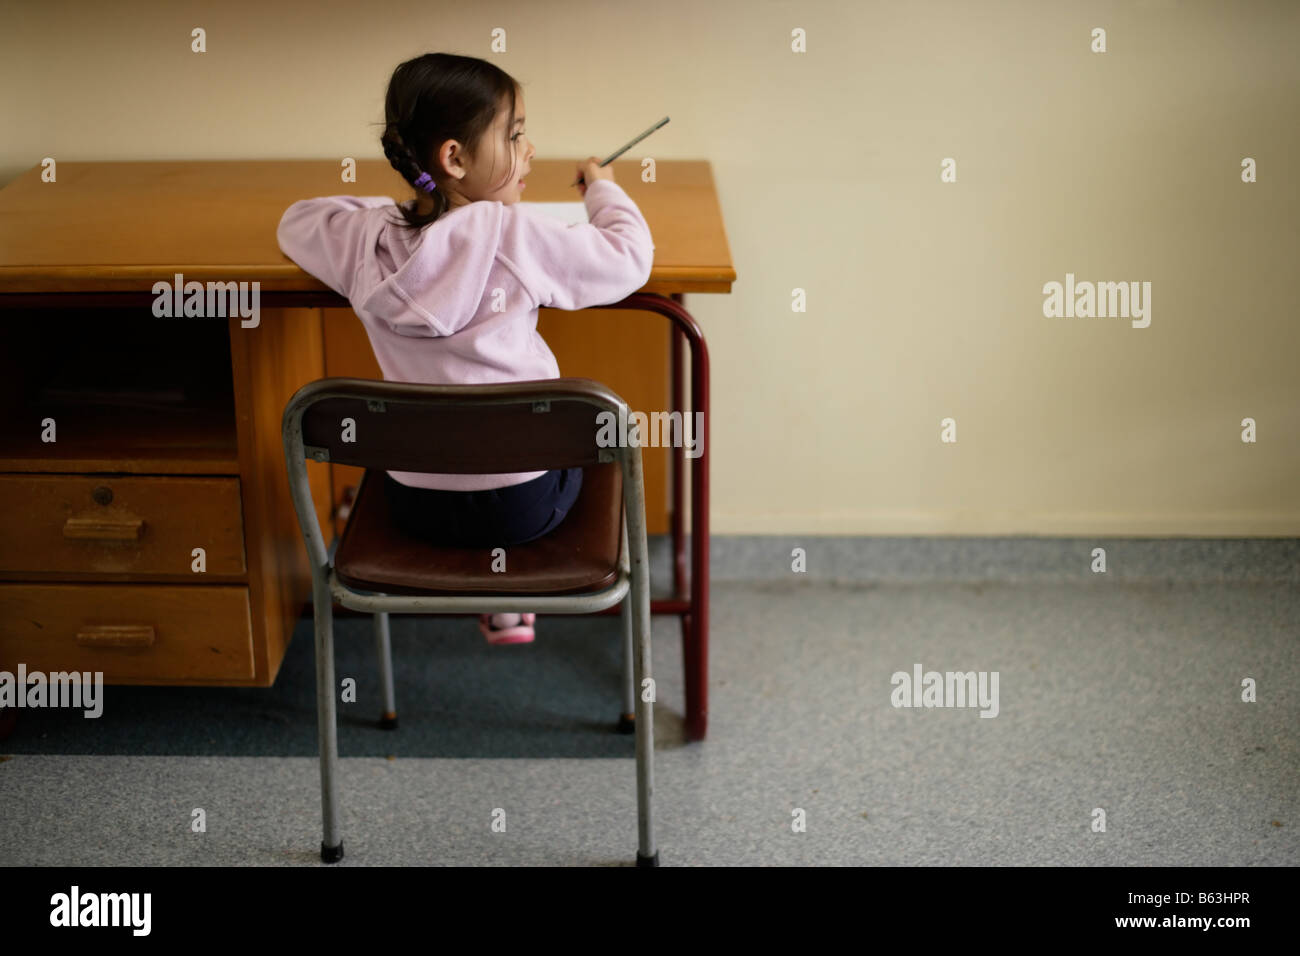 Five year old girl sitting at a desk writing Stock Photo